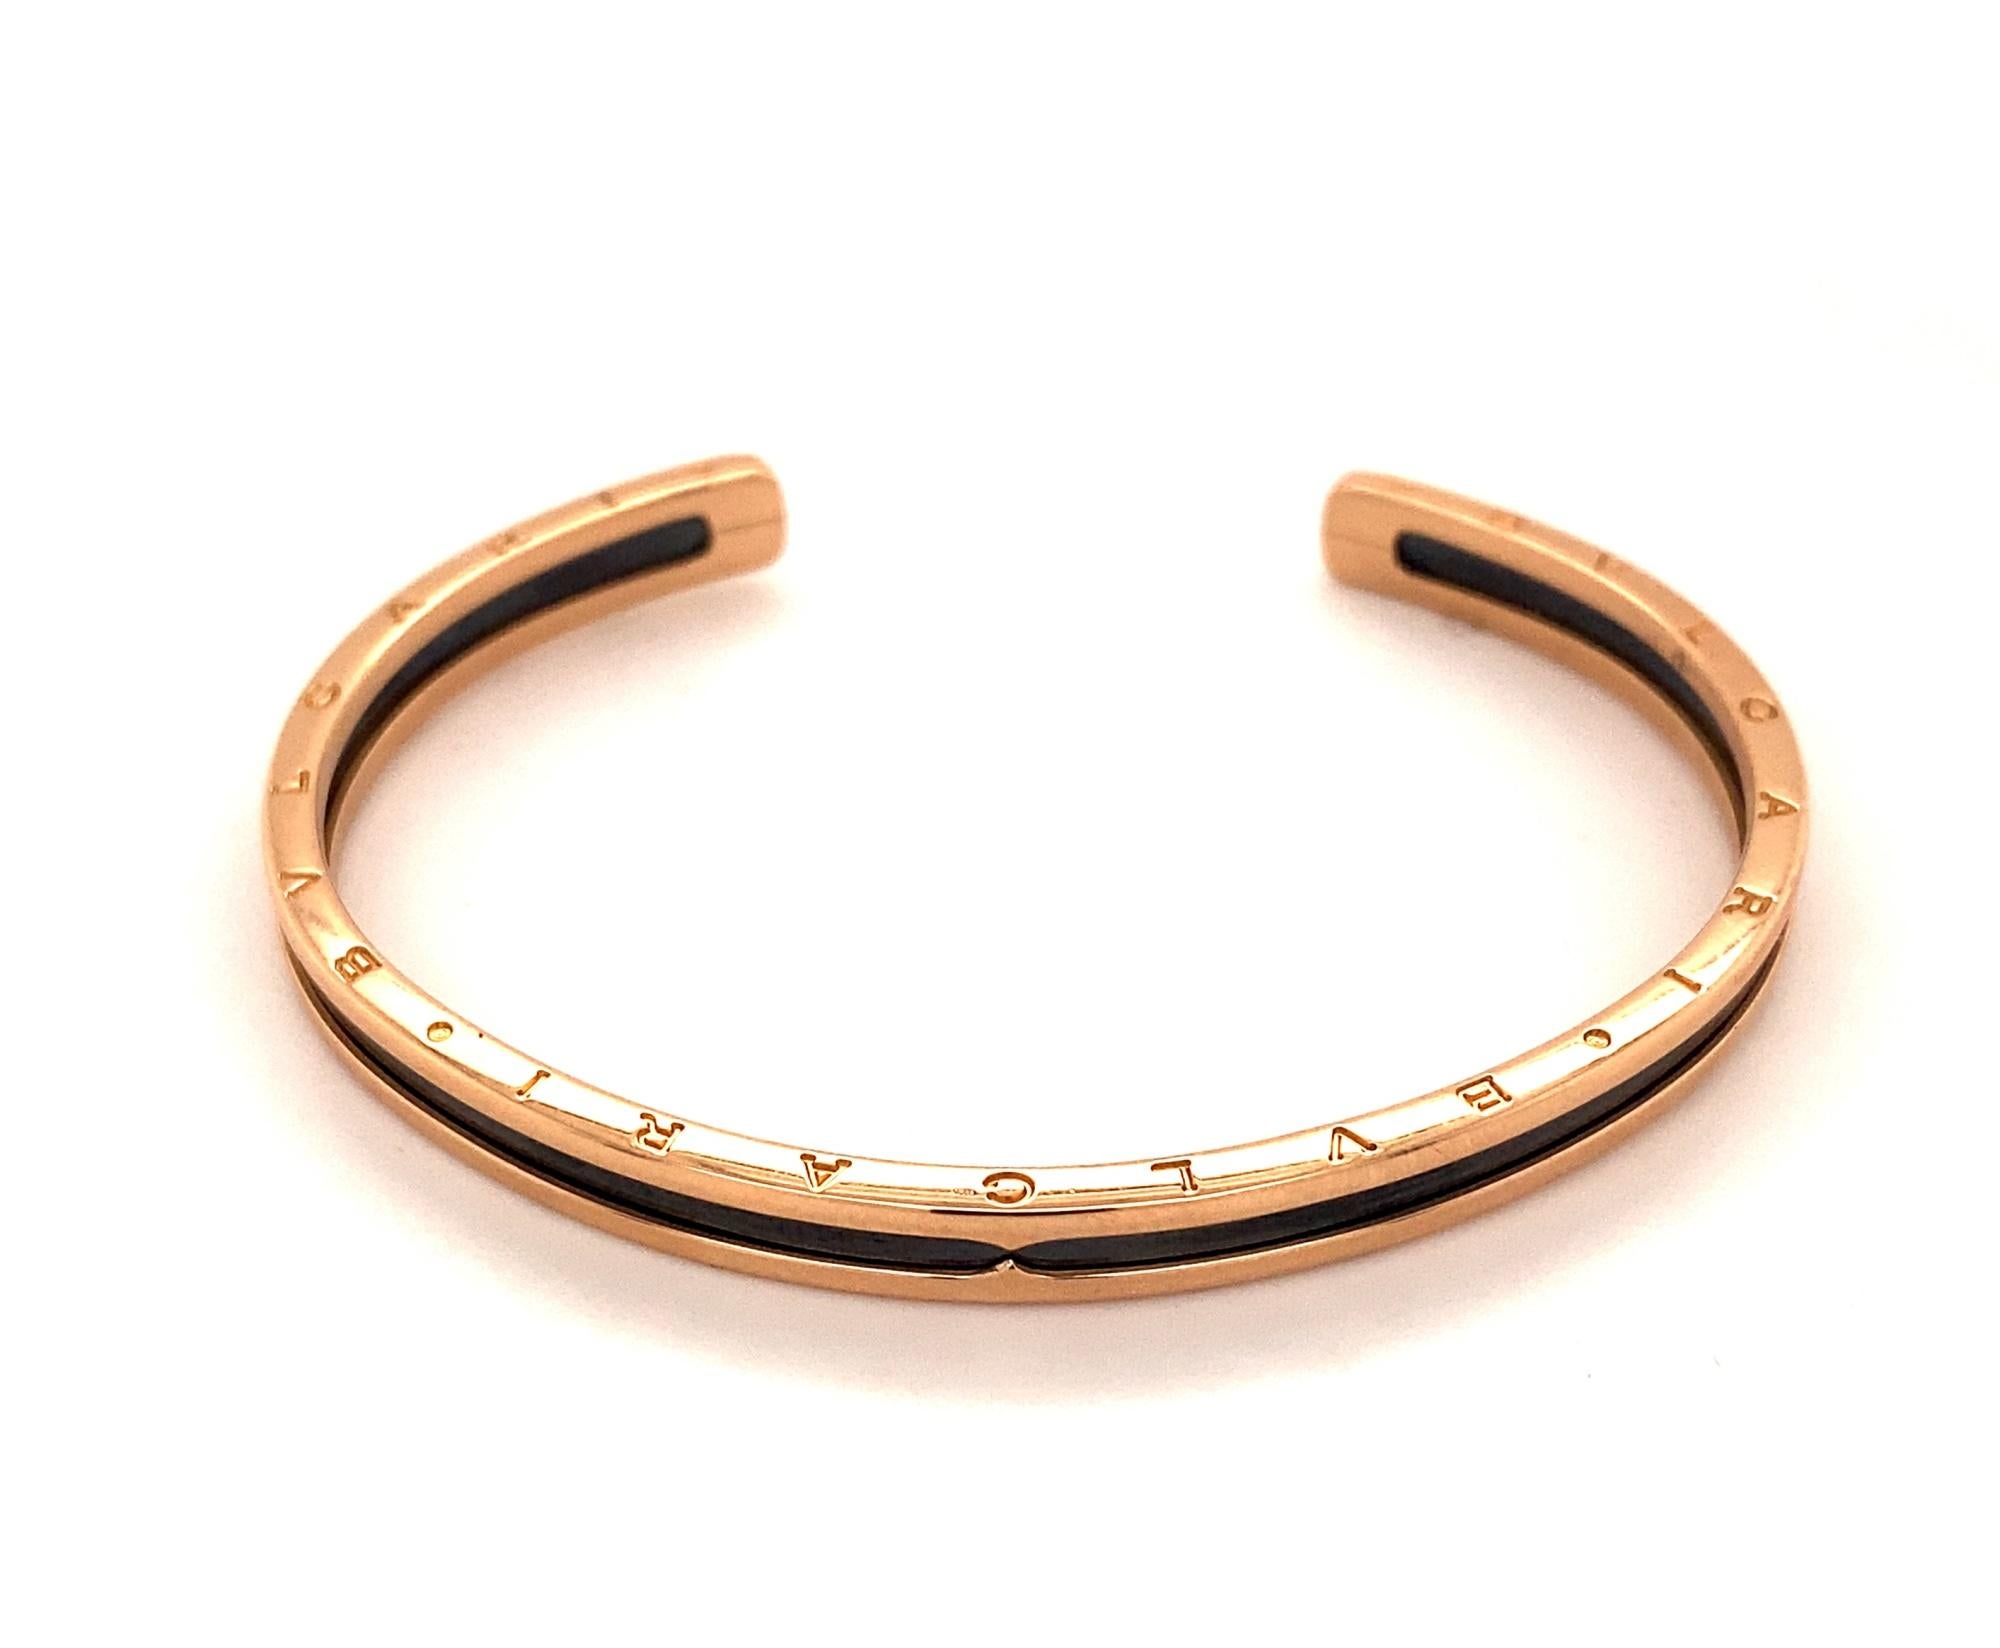 Bvlgari B-Zero1 18K Rose Gold and Stainless Steel Bangle For Sale 1